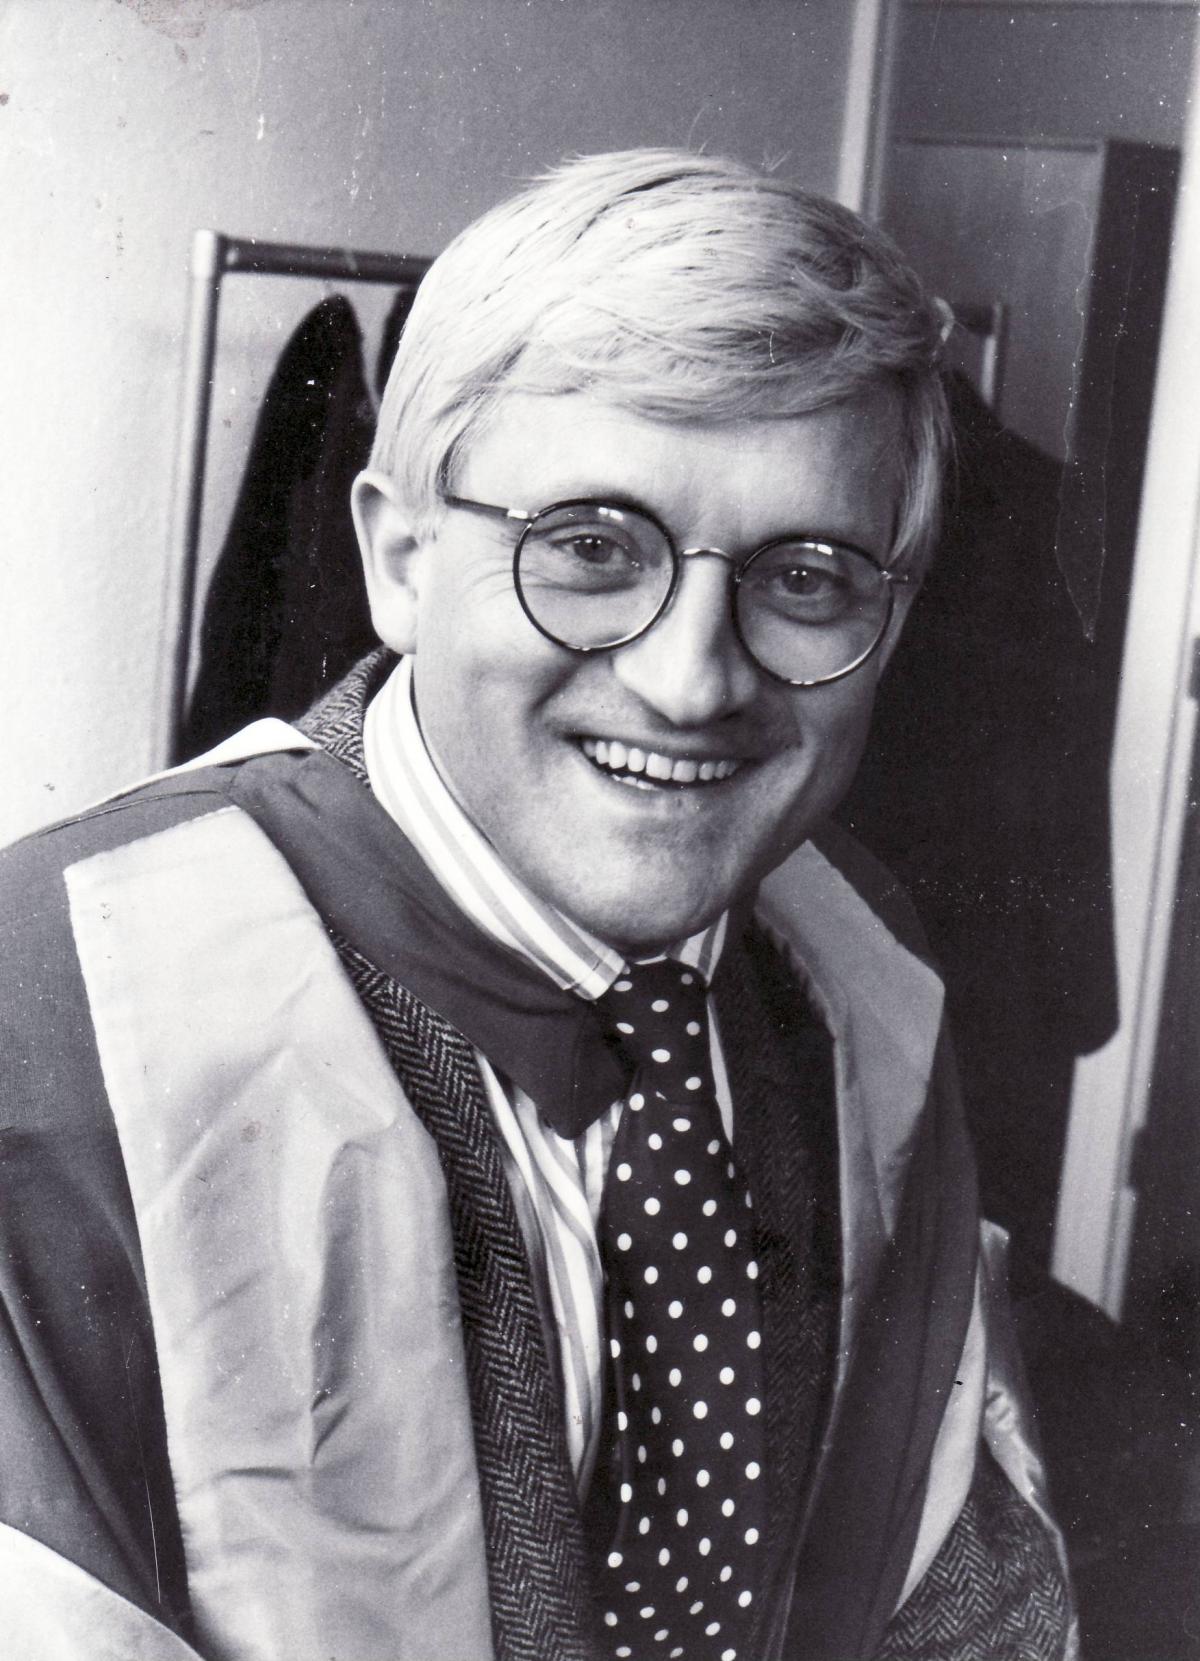 The artist in university gown in 1983